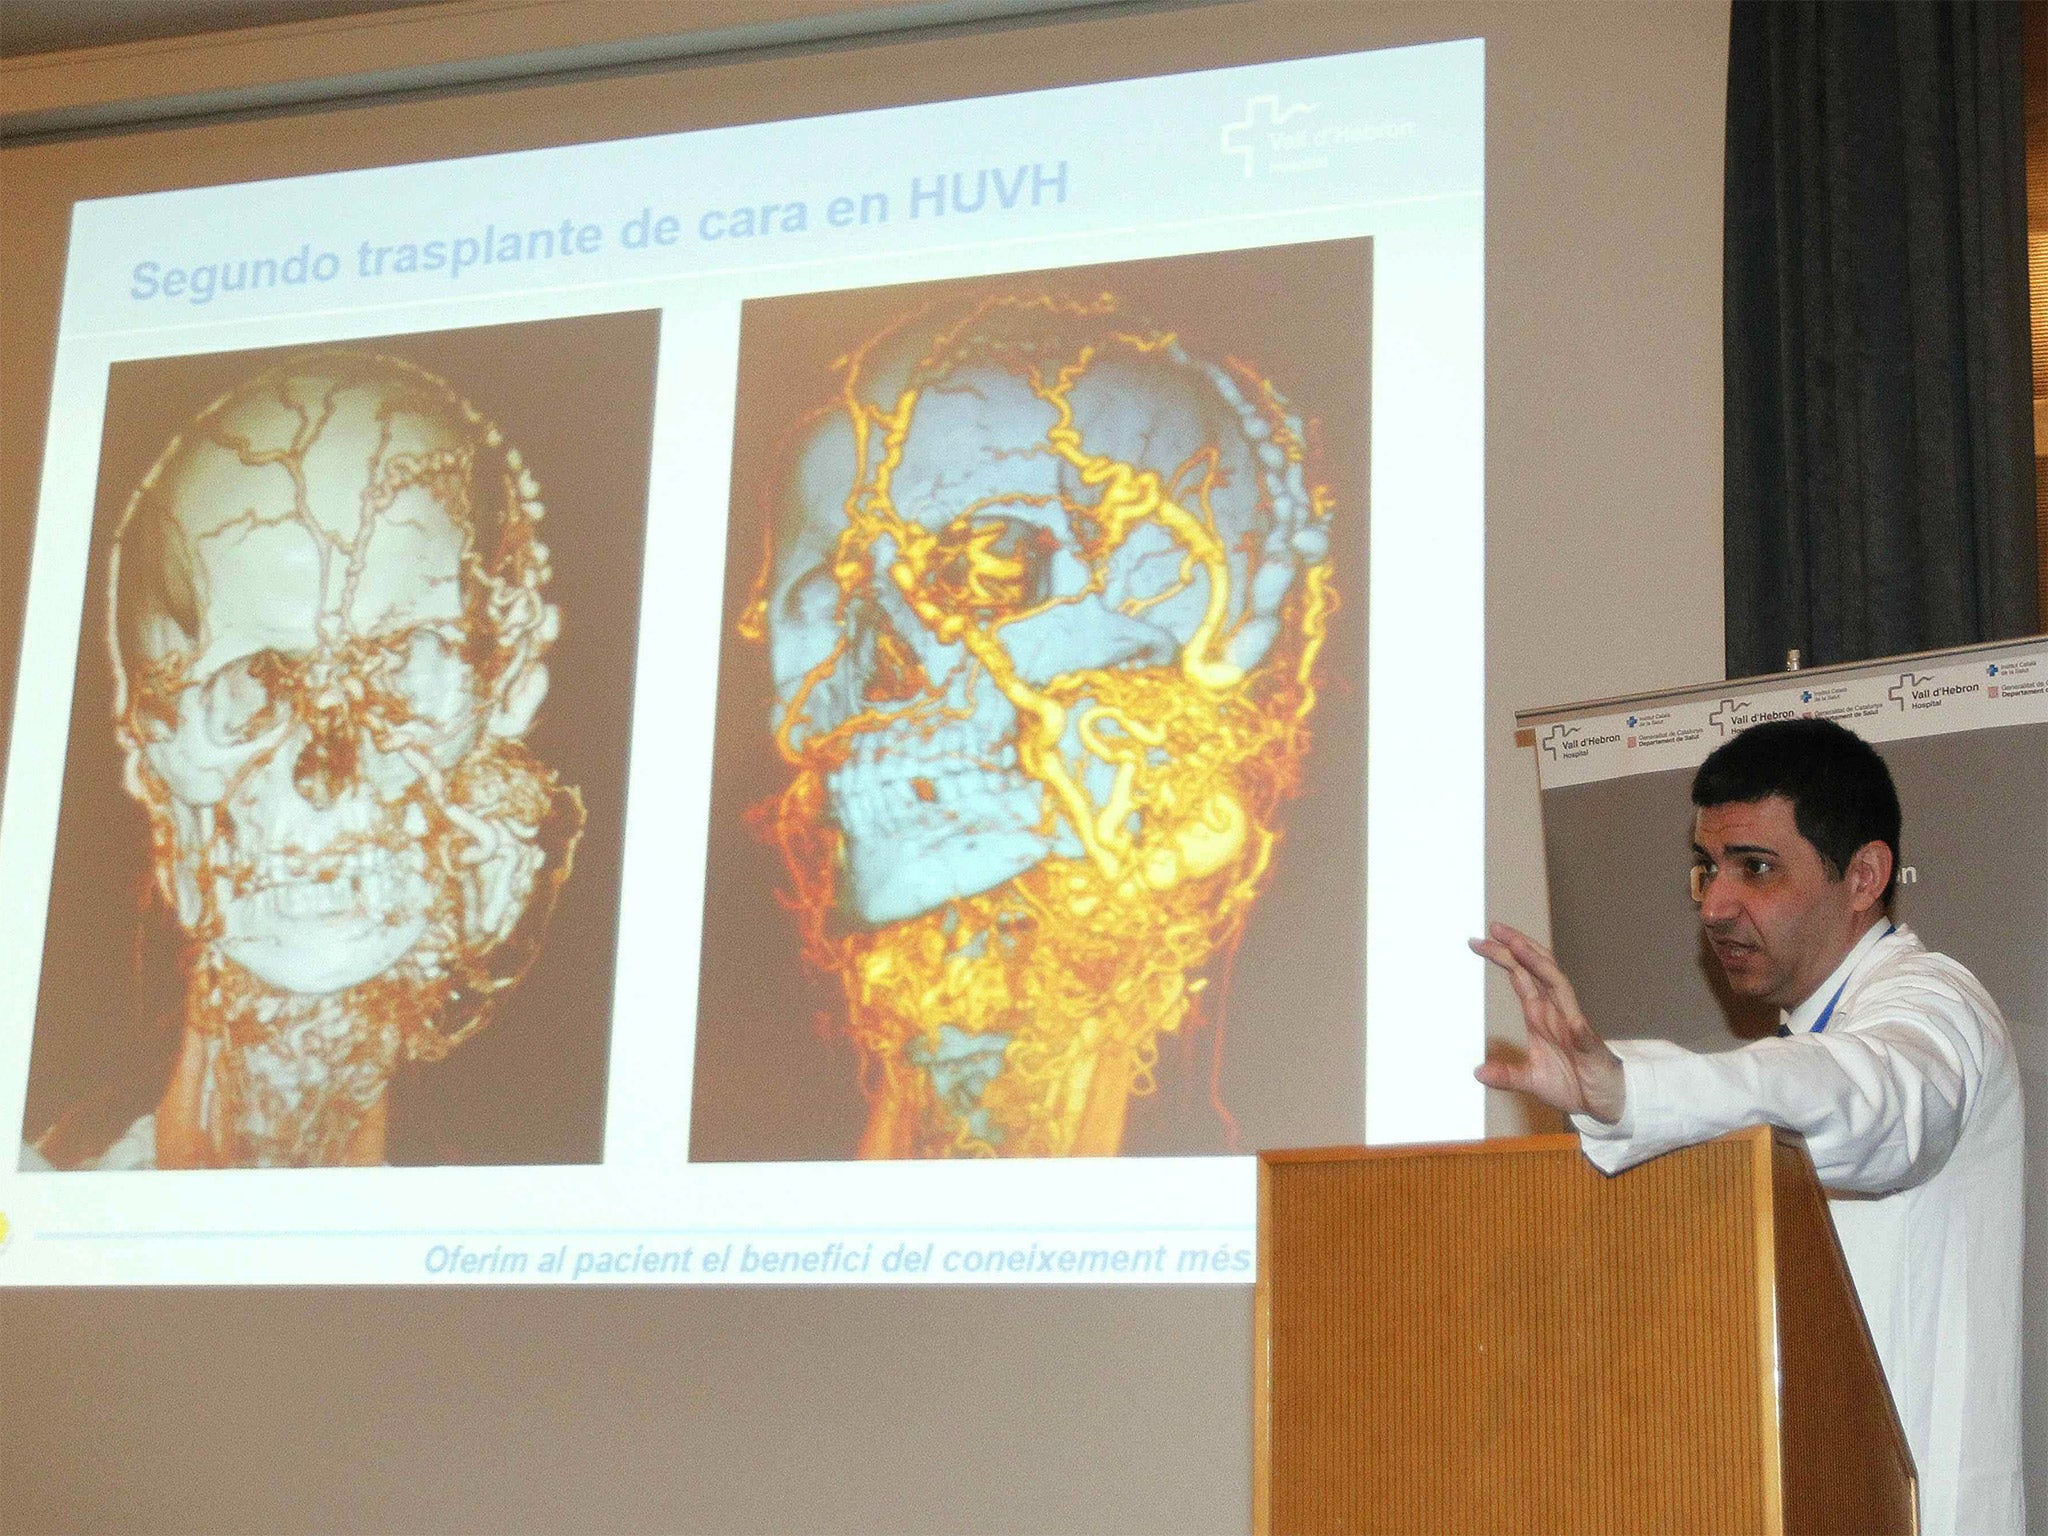 Doctor Joan-Pere Barret, chief of the Plastic Surgery and Burn Reconstruction department at the Vall d'Hebron hospital in Barcelona, explains the hospital's second face transplant